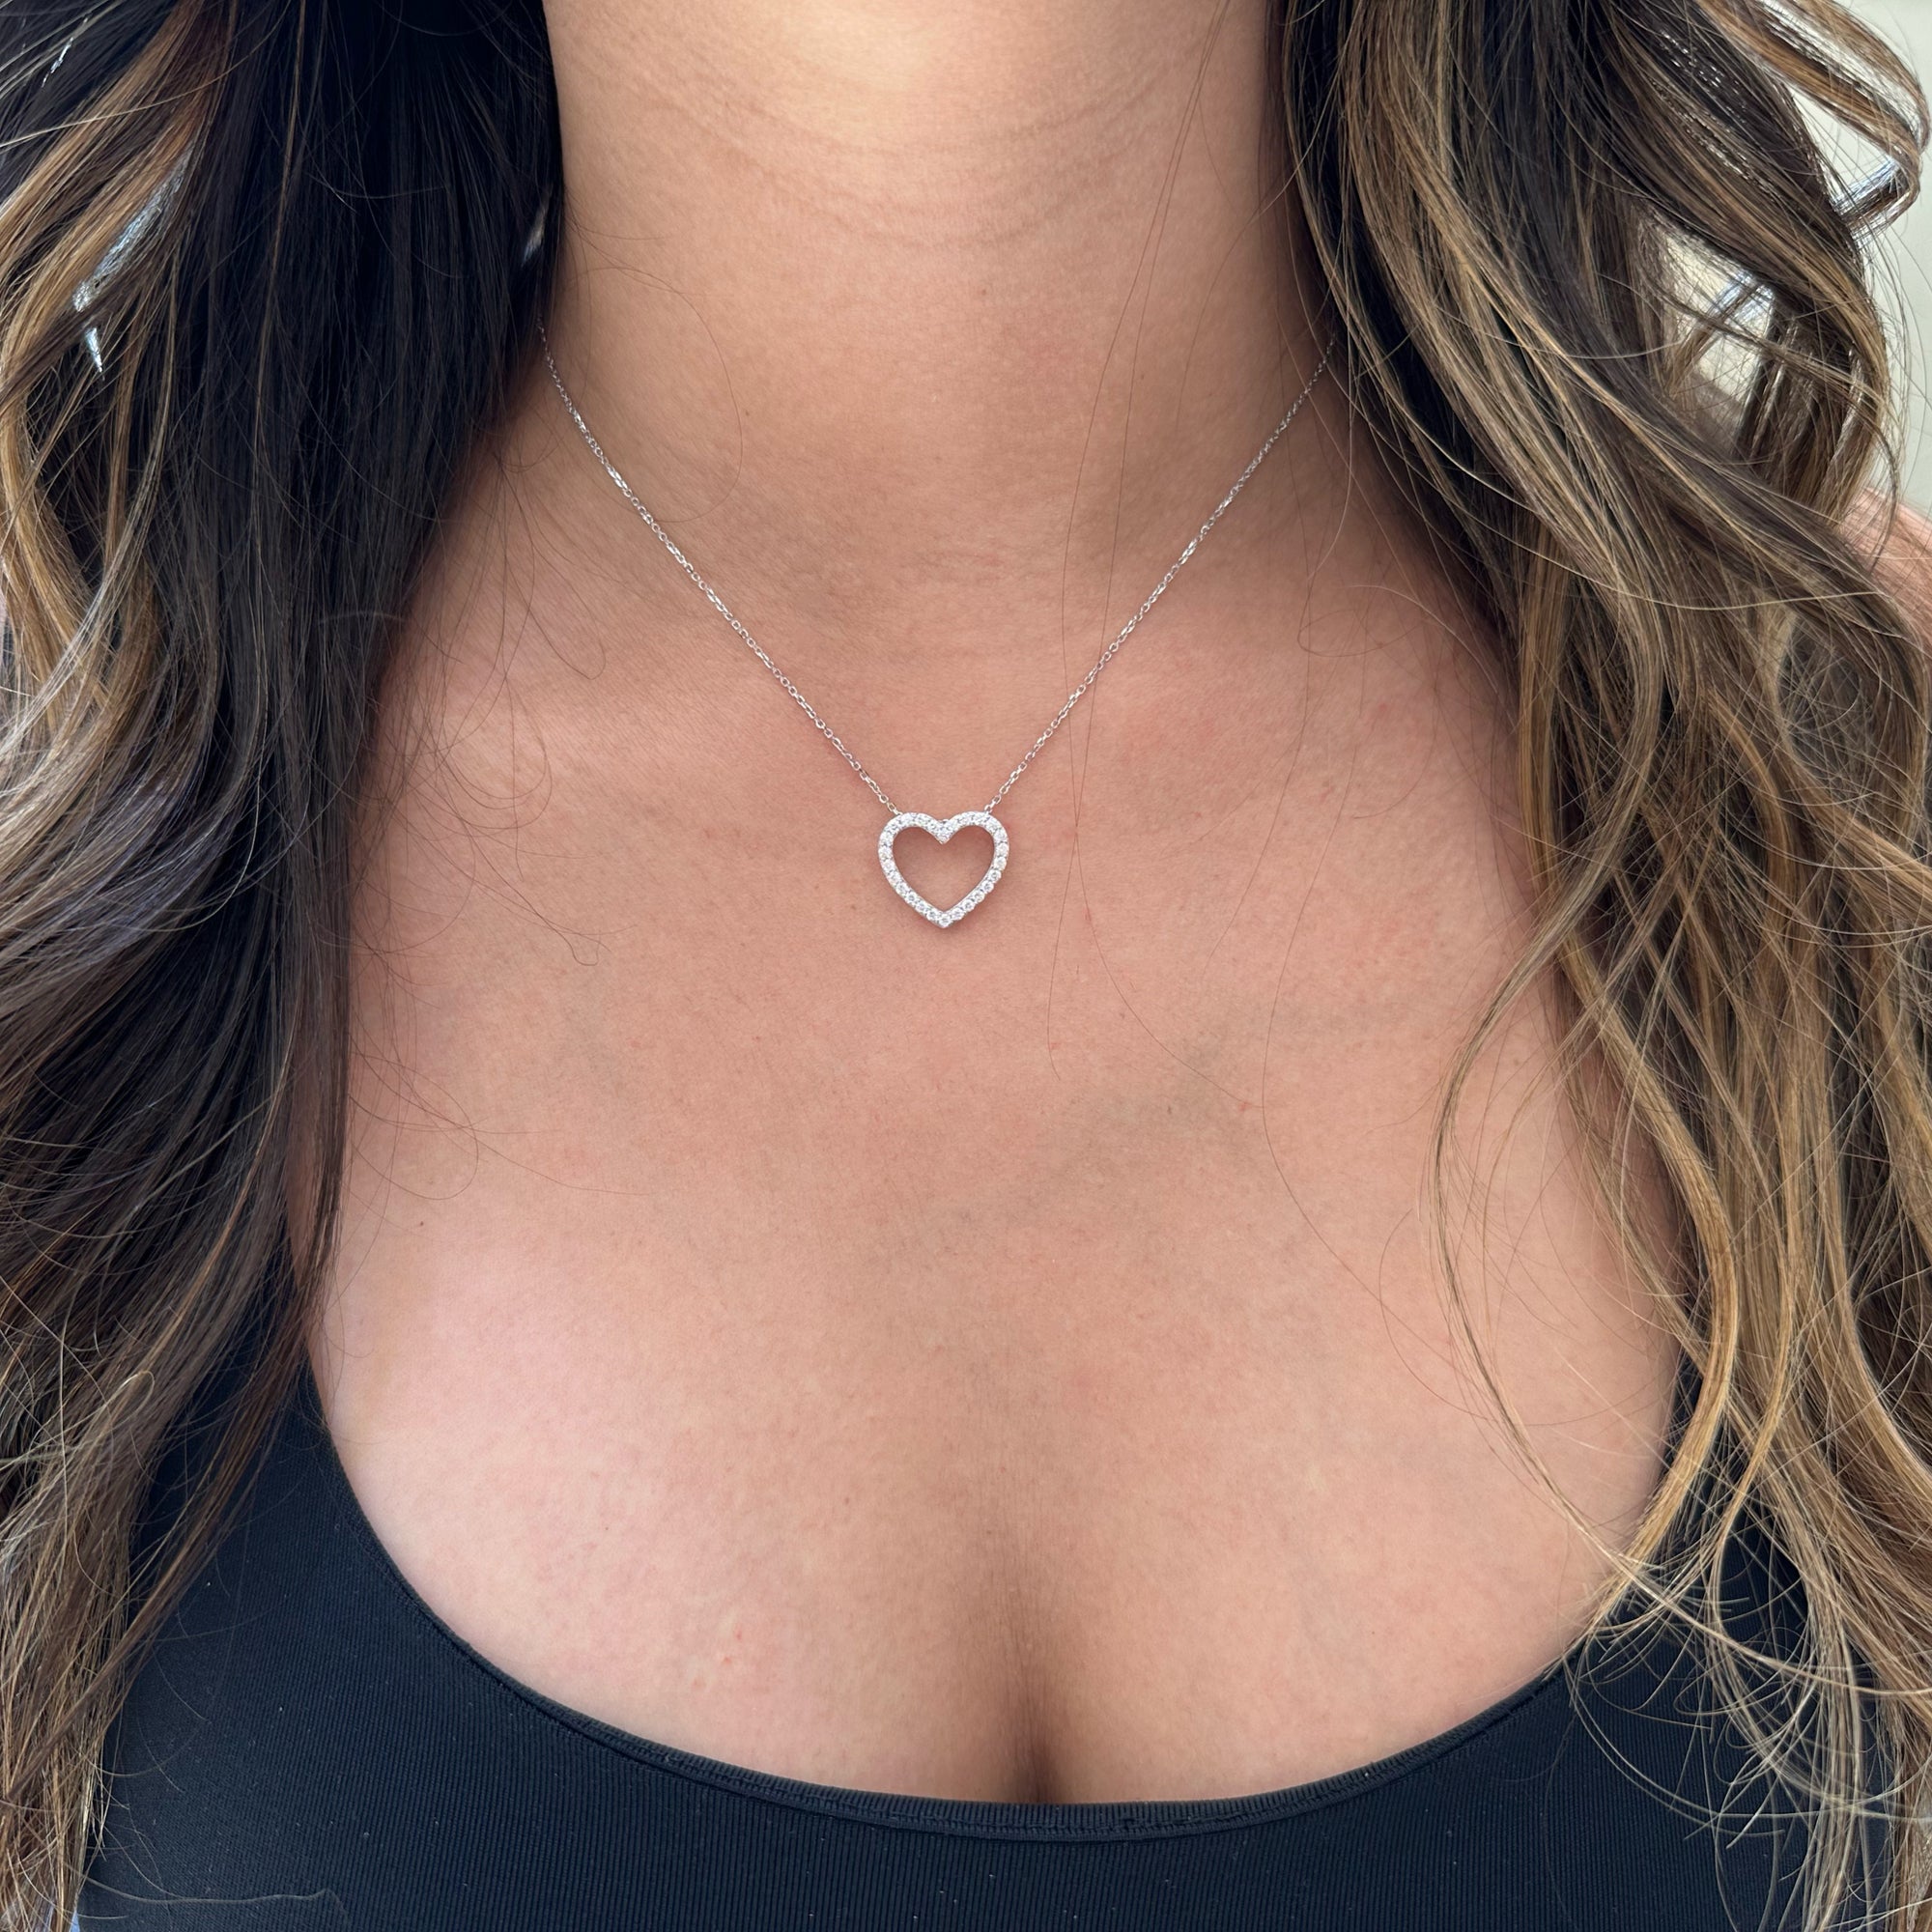 Diamond Heart Cutout Pendant Necklace  -14K gold weighing 3.3 grams  -26 round shared prong-set brilliant diamonds totaling 0.75 carats  -Chain measures 16 inches.